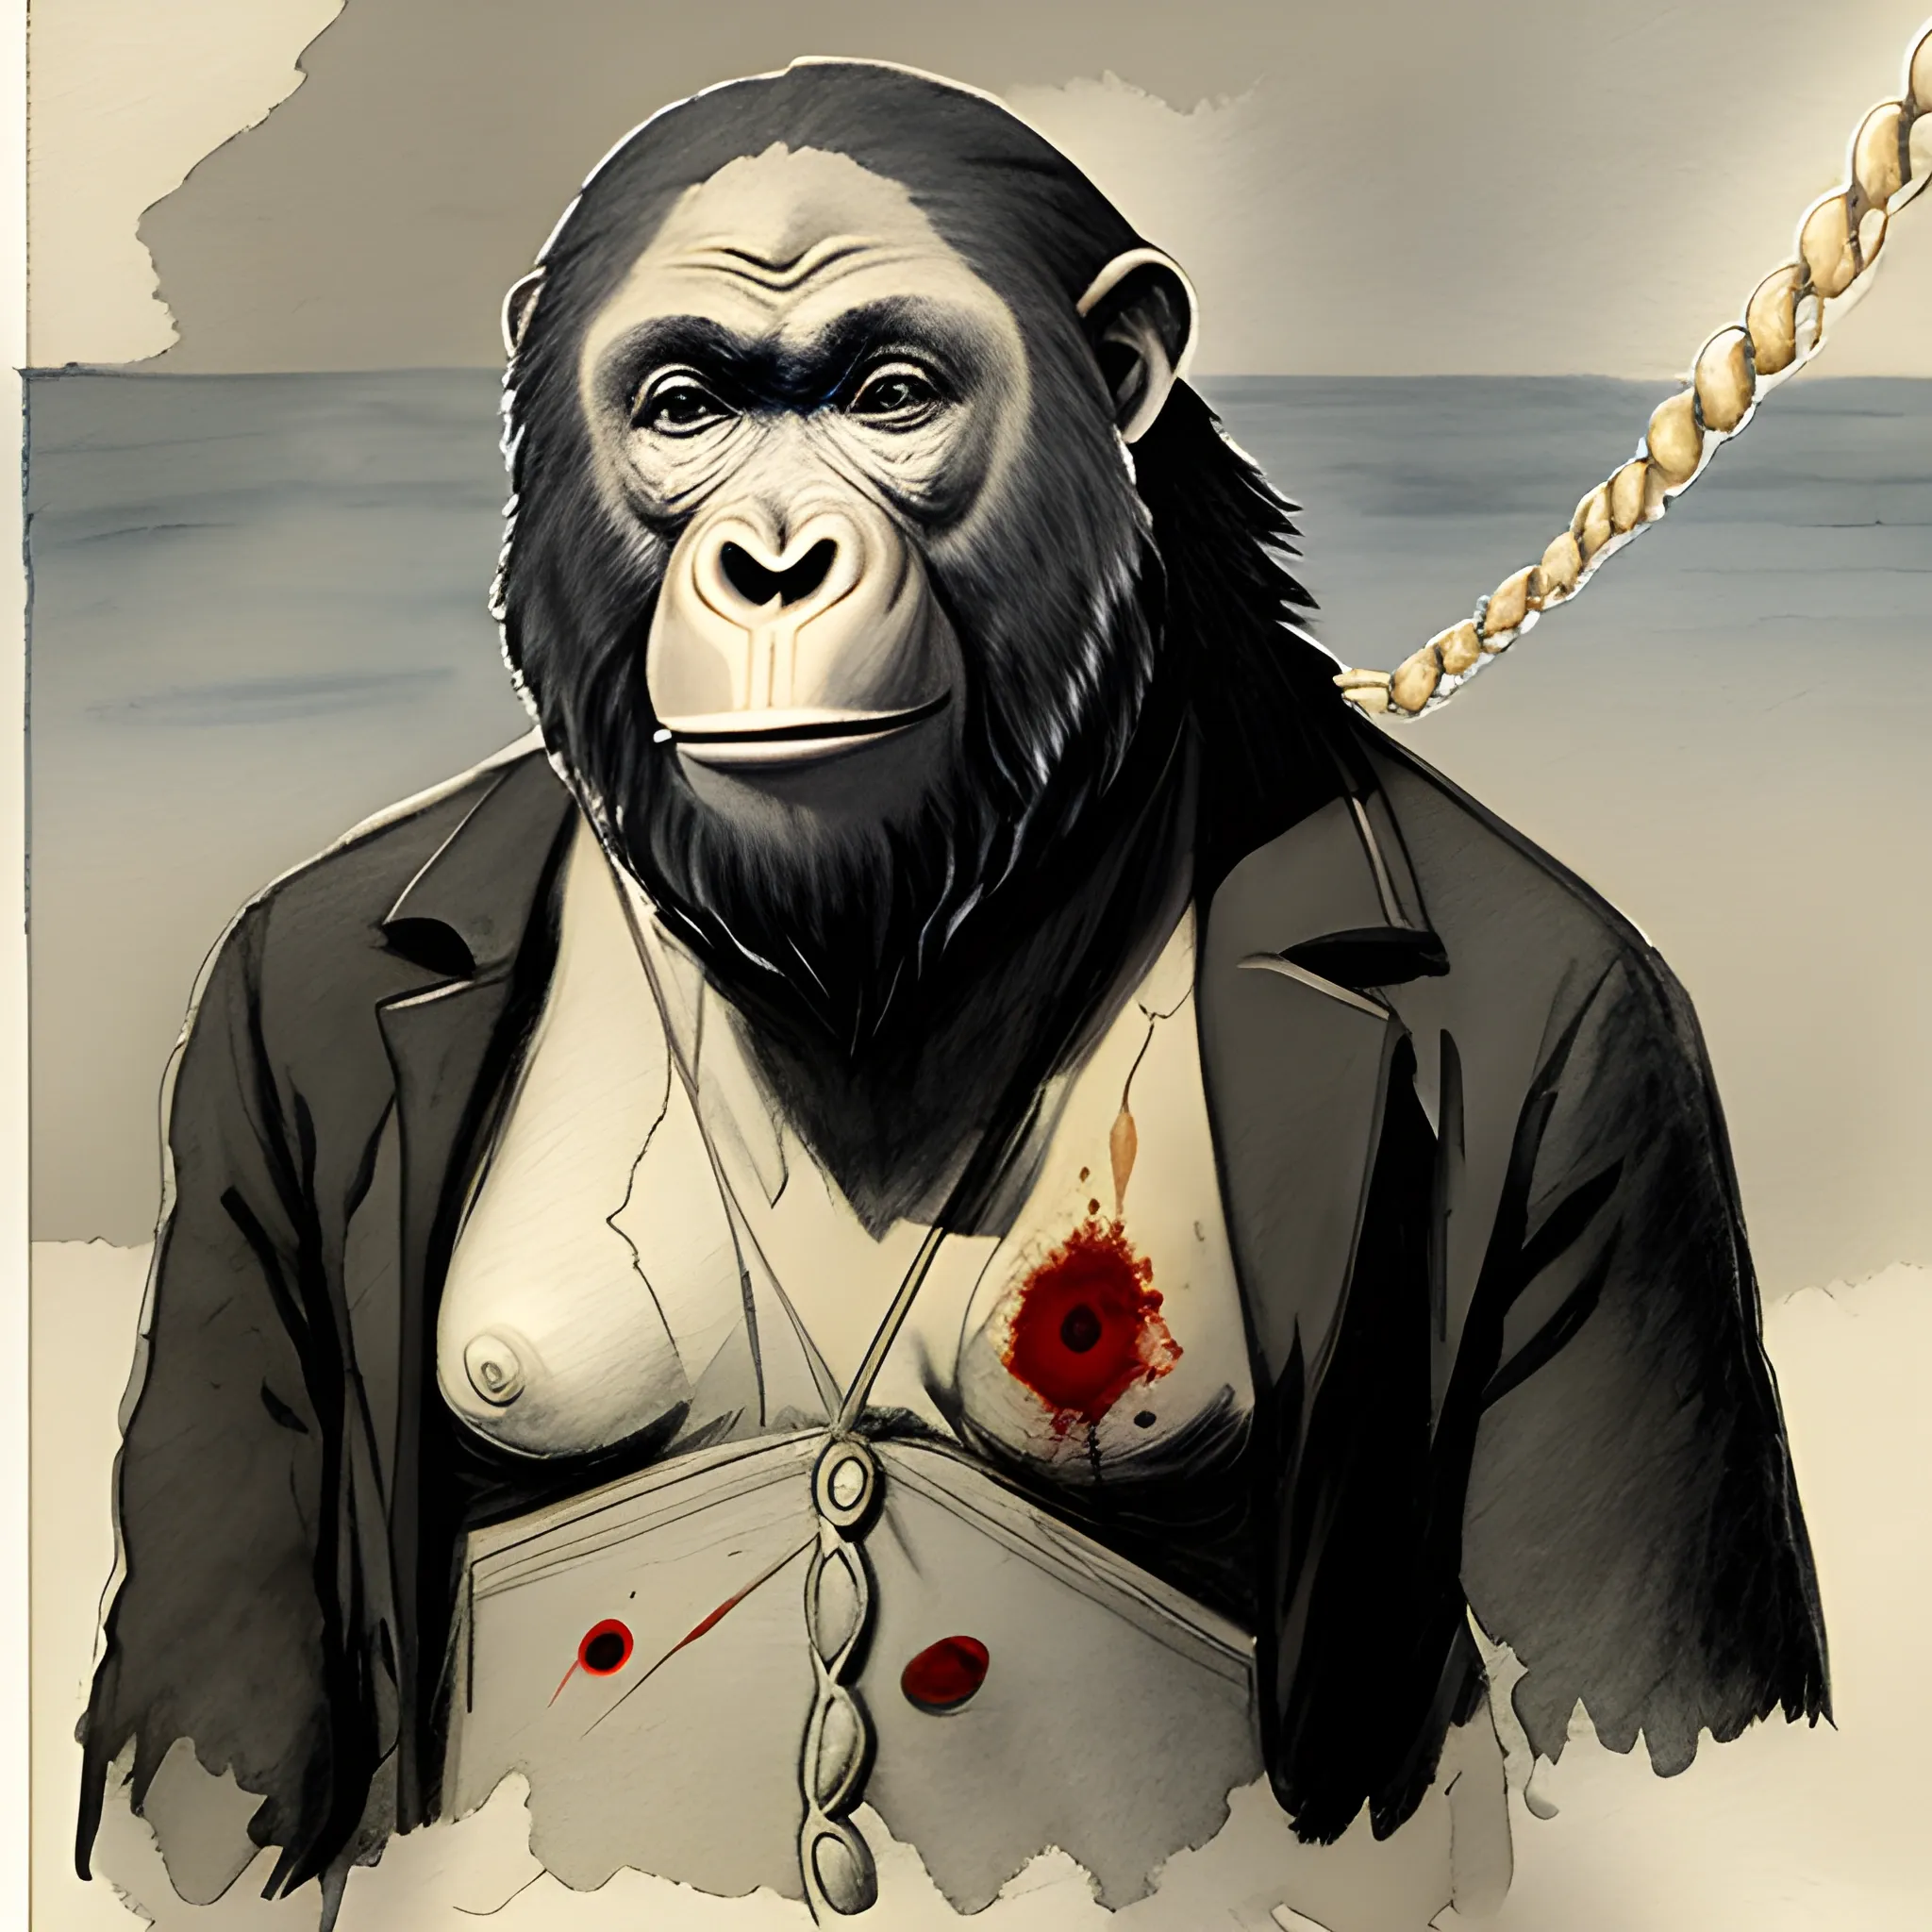 Goya Style, Pencil Sketch, Water Color,  killer Ape cover with blood, french sailor with a leash, the leash tie to the neck of the ape, Goya Style, low saturation, Dark and mystery atmosphera, low bright
